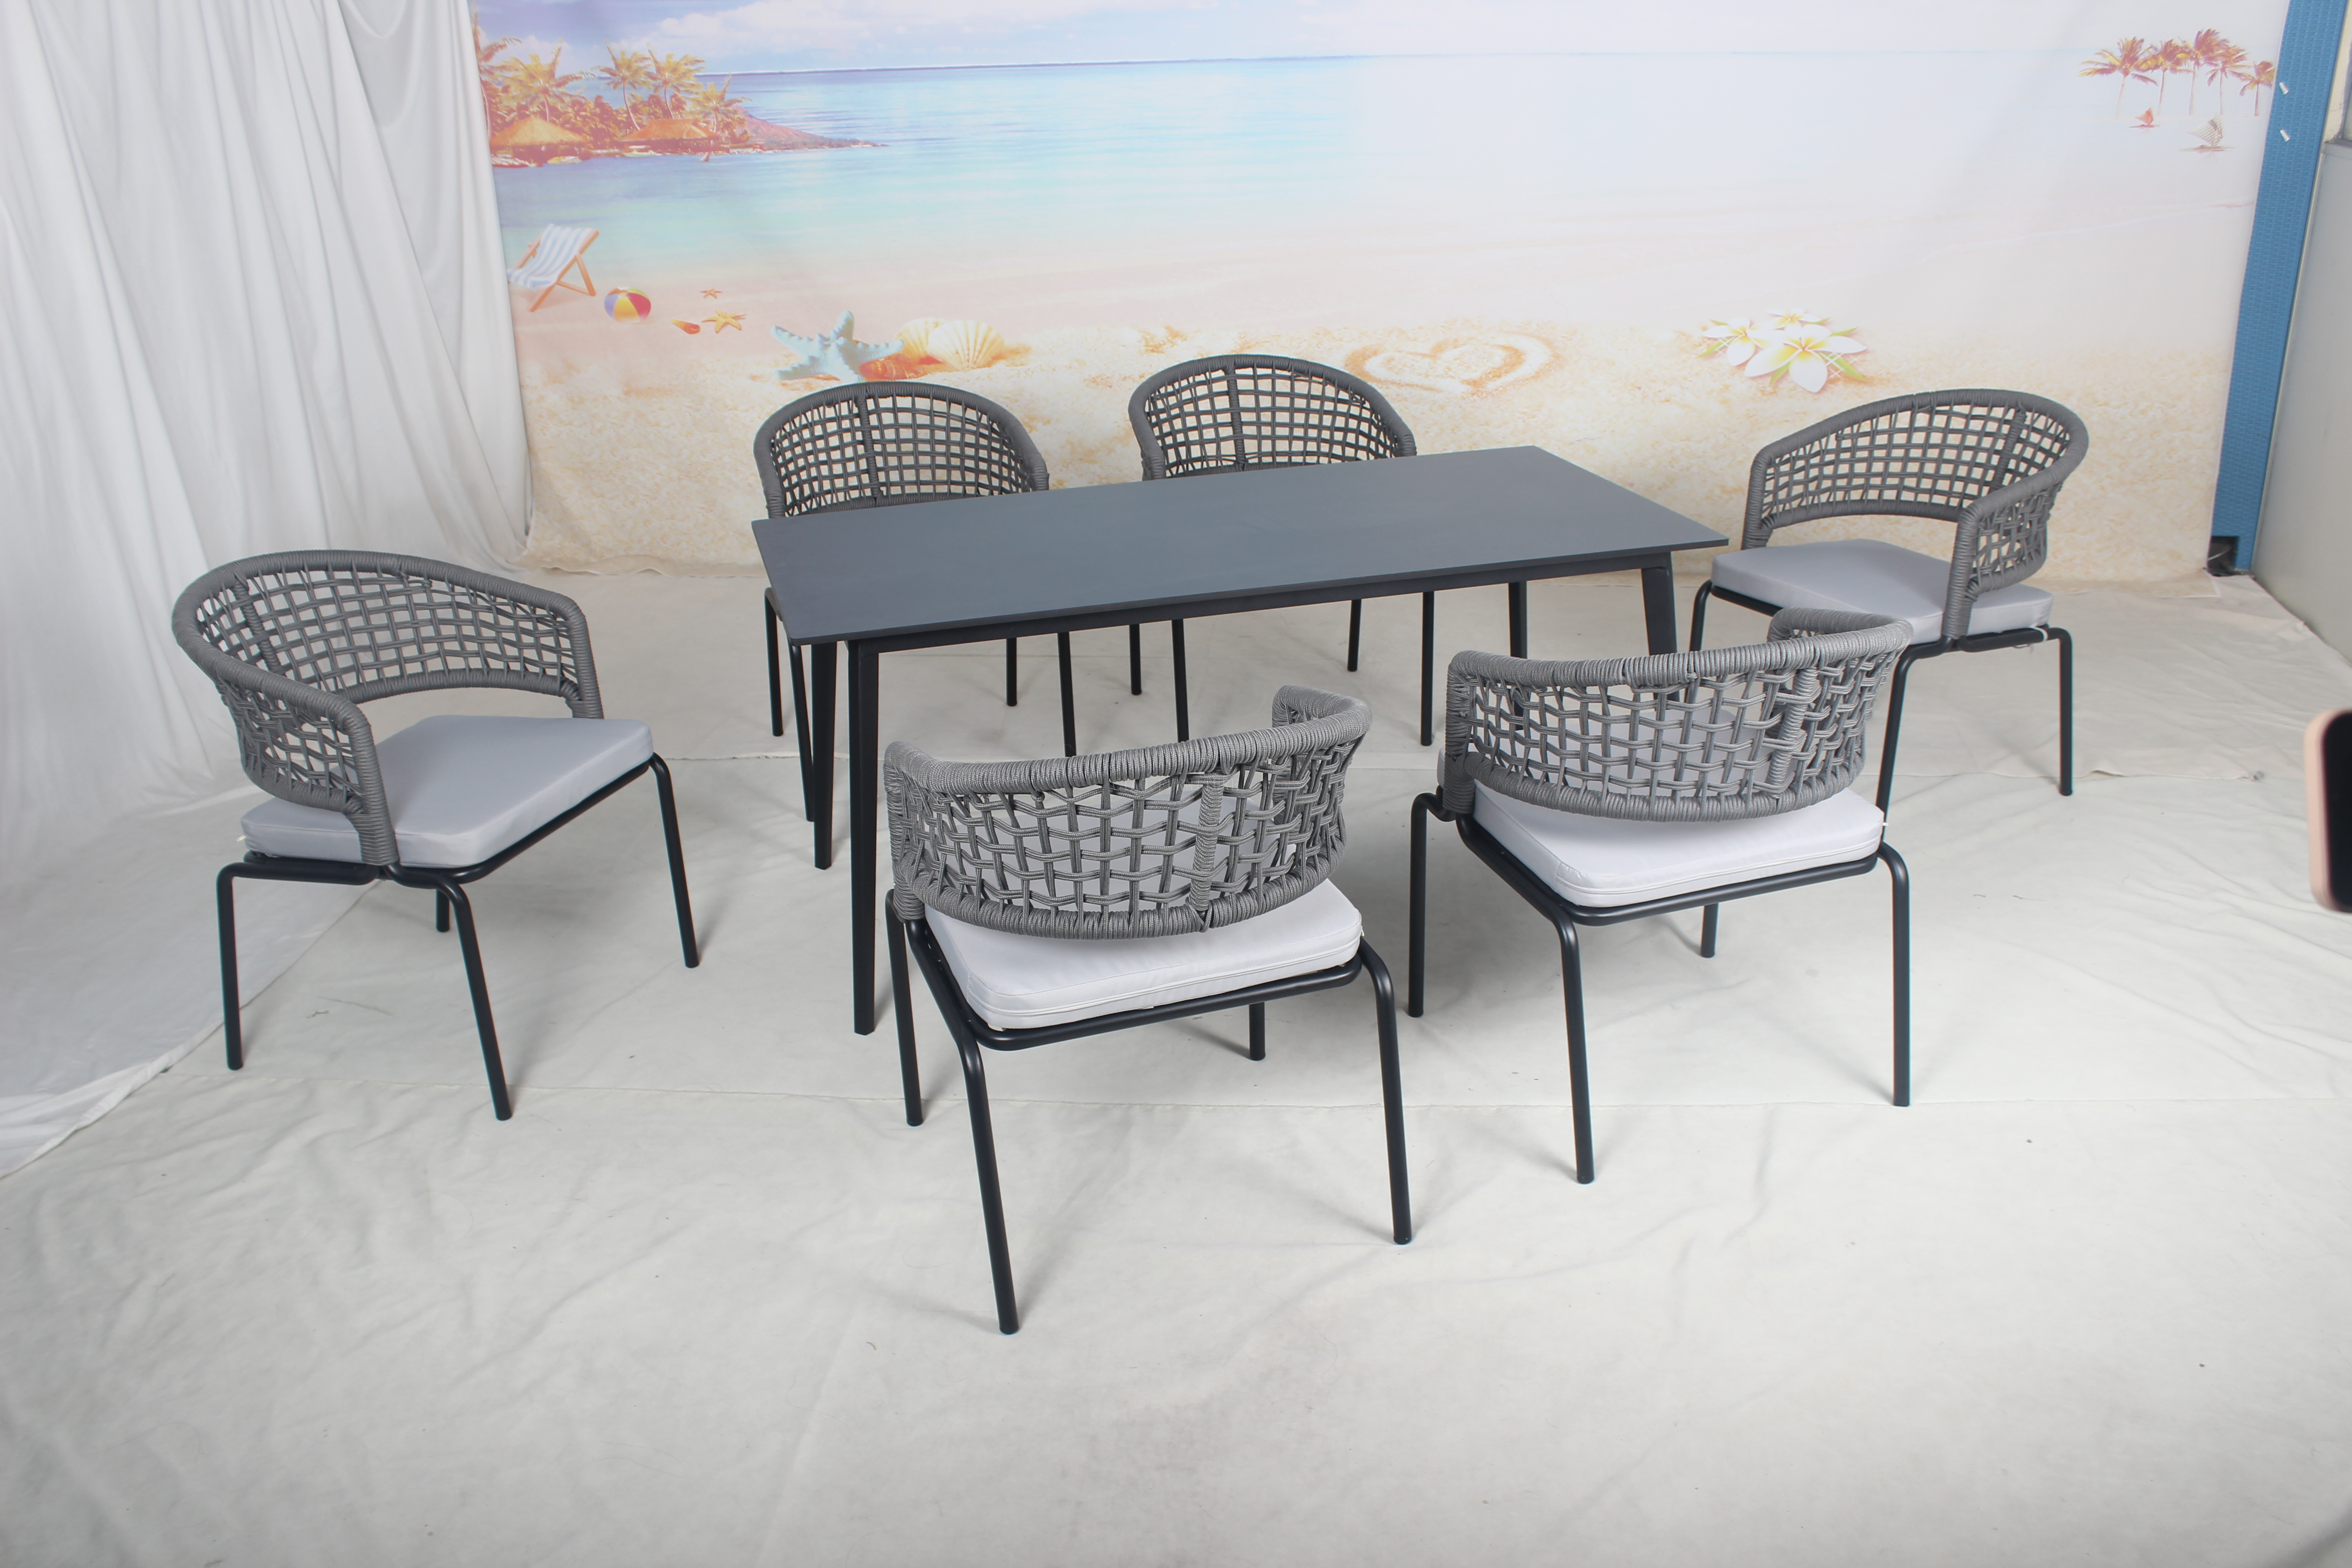 6 seat outdoor restaurant table and chairs set 